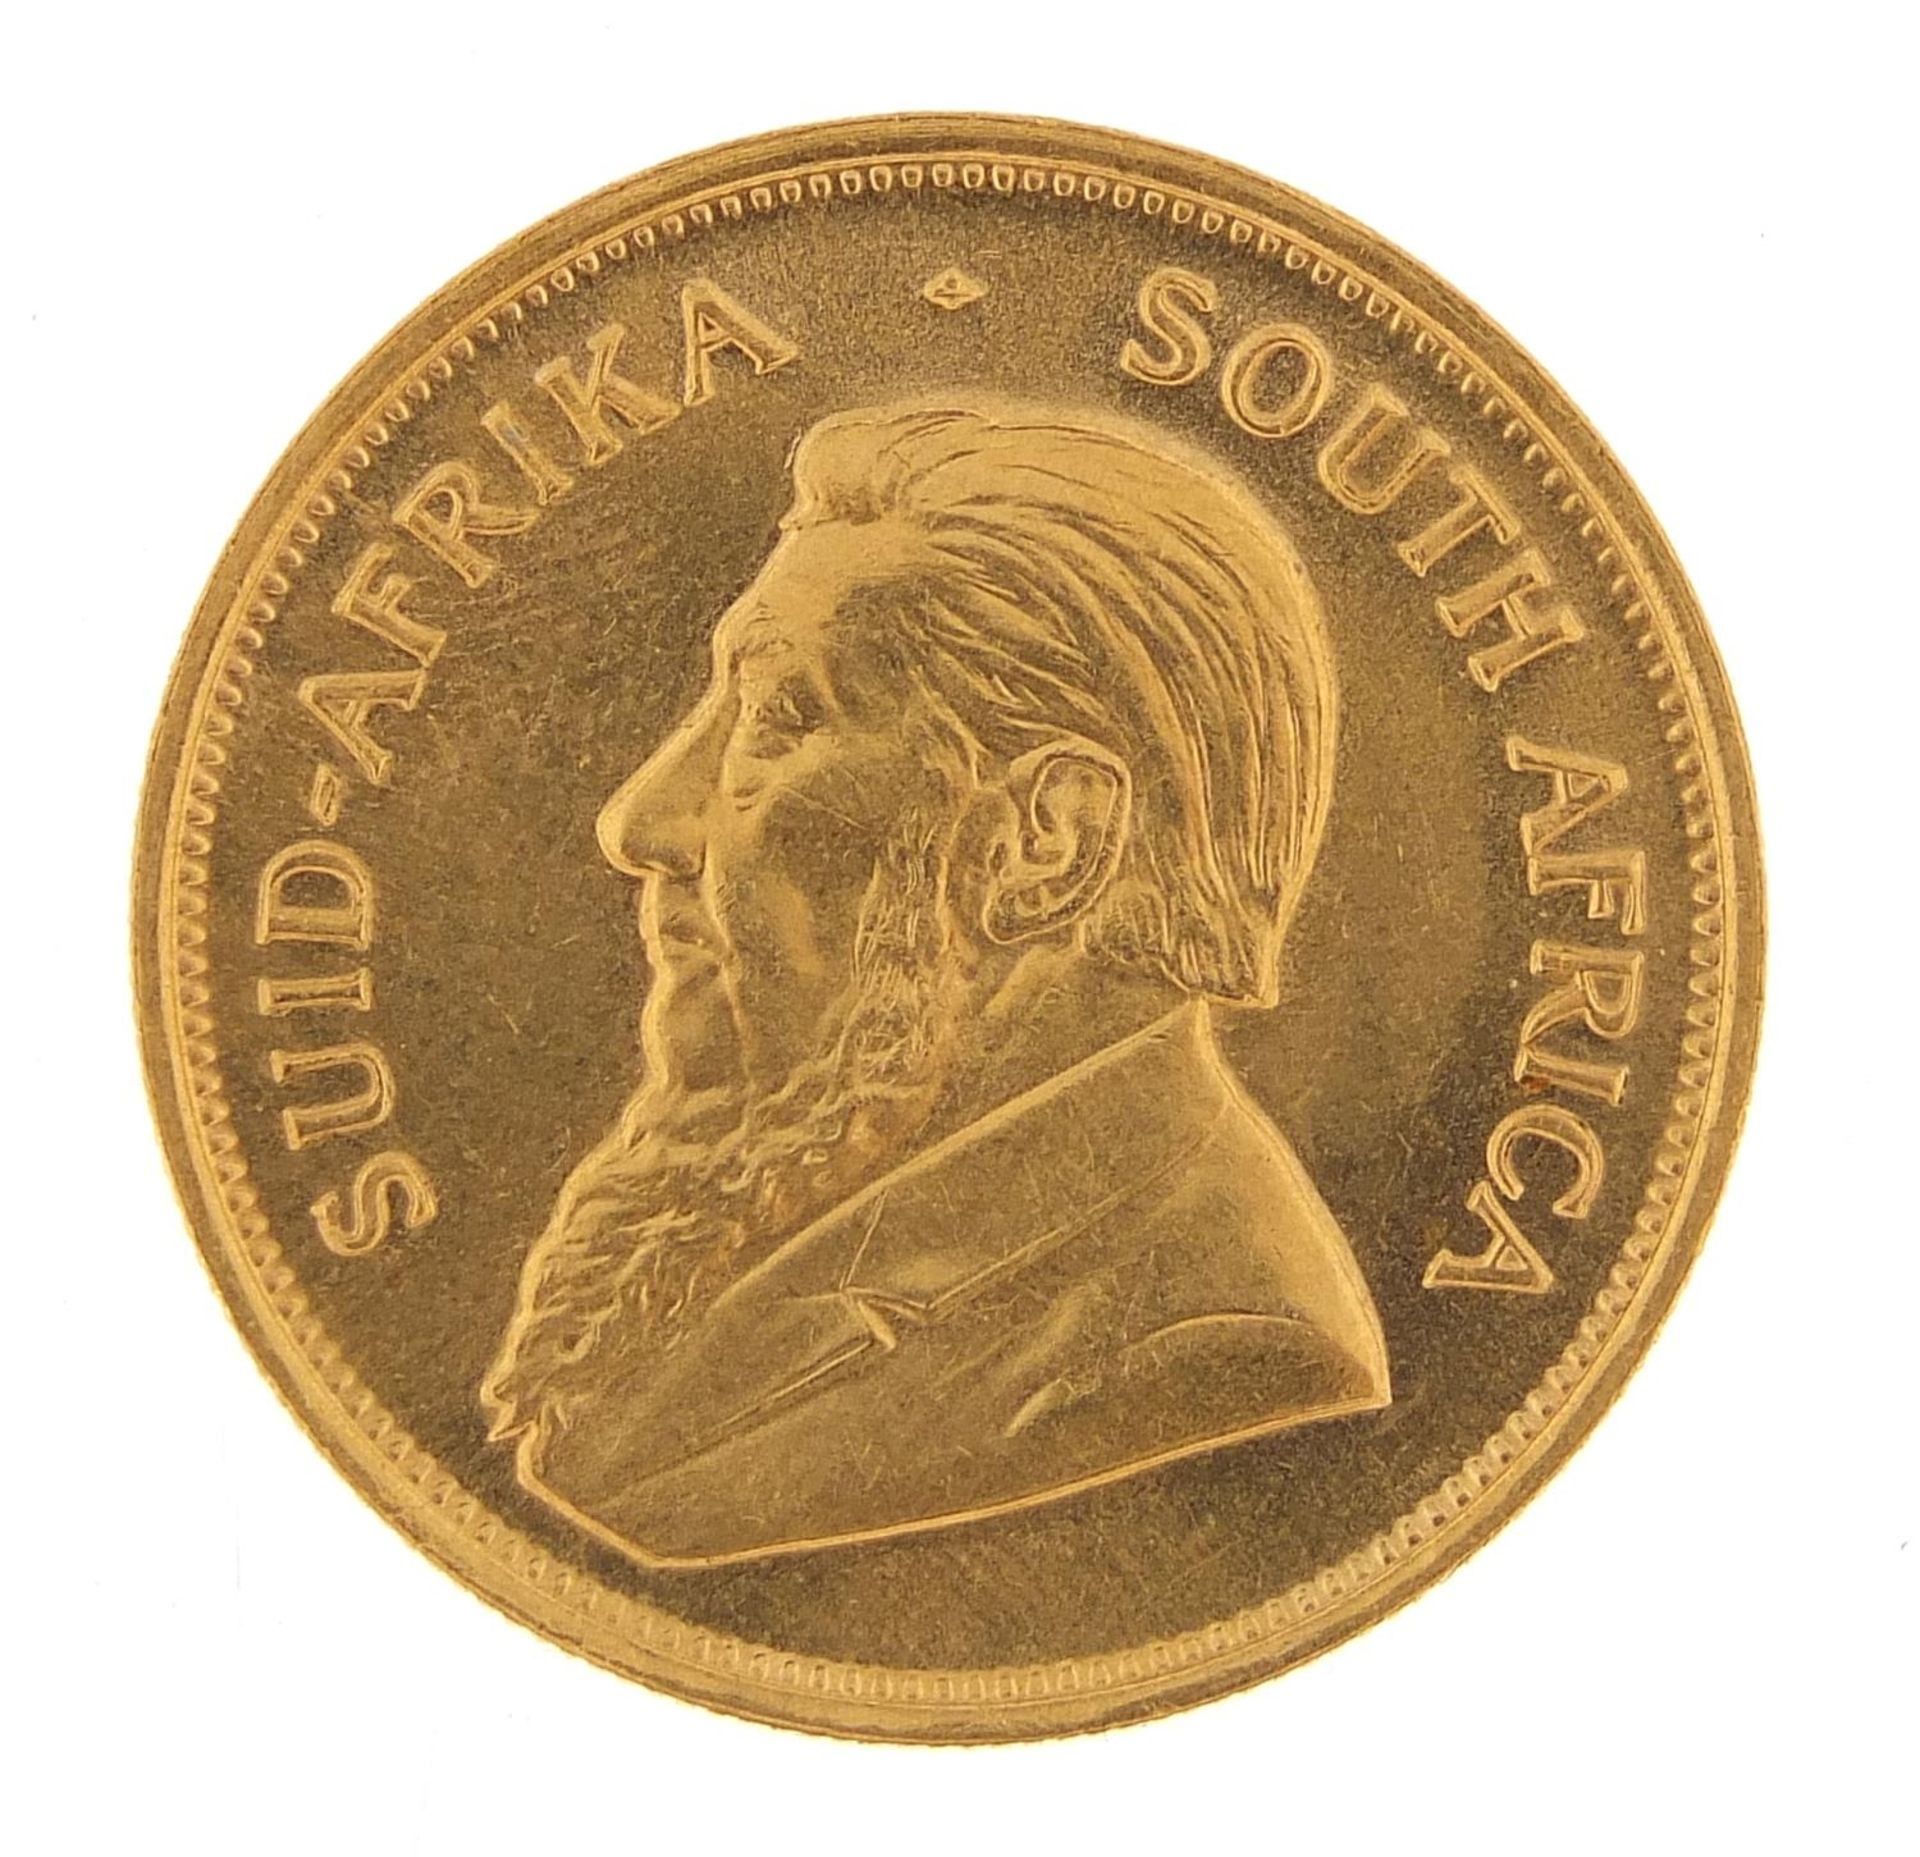 South African 1974 gold krugerrand - this lot is sold without buyer?s premium, the hammer price is - Image 2 of 3